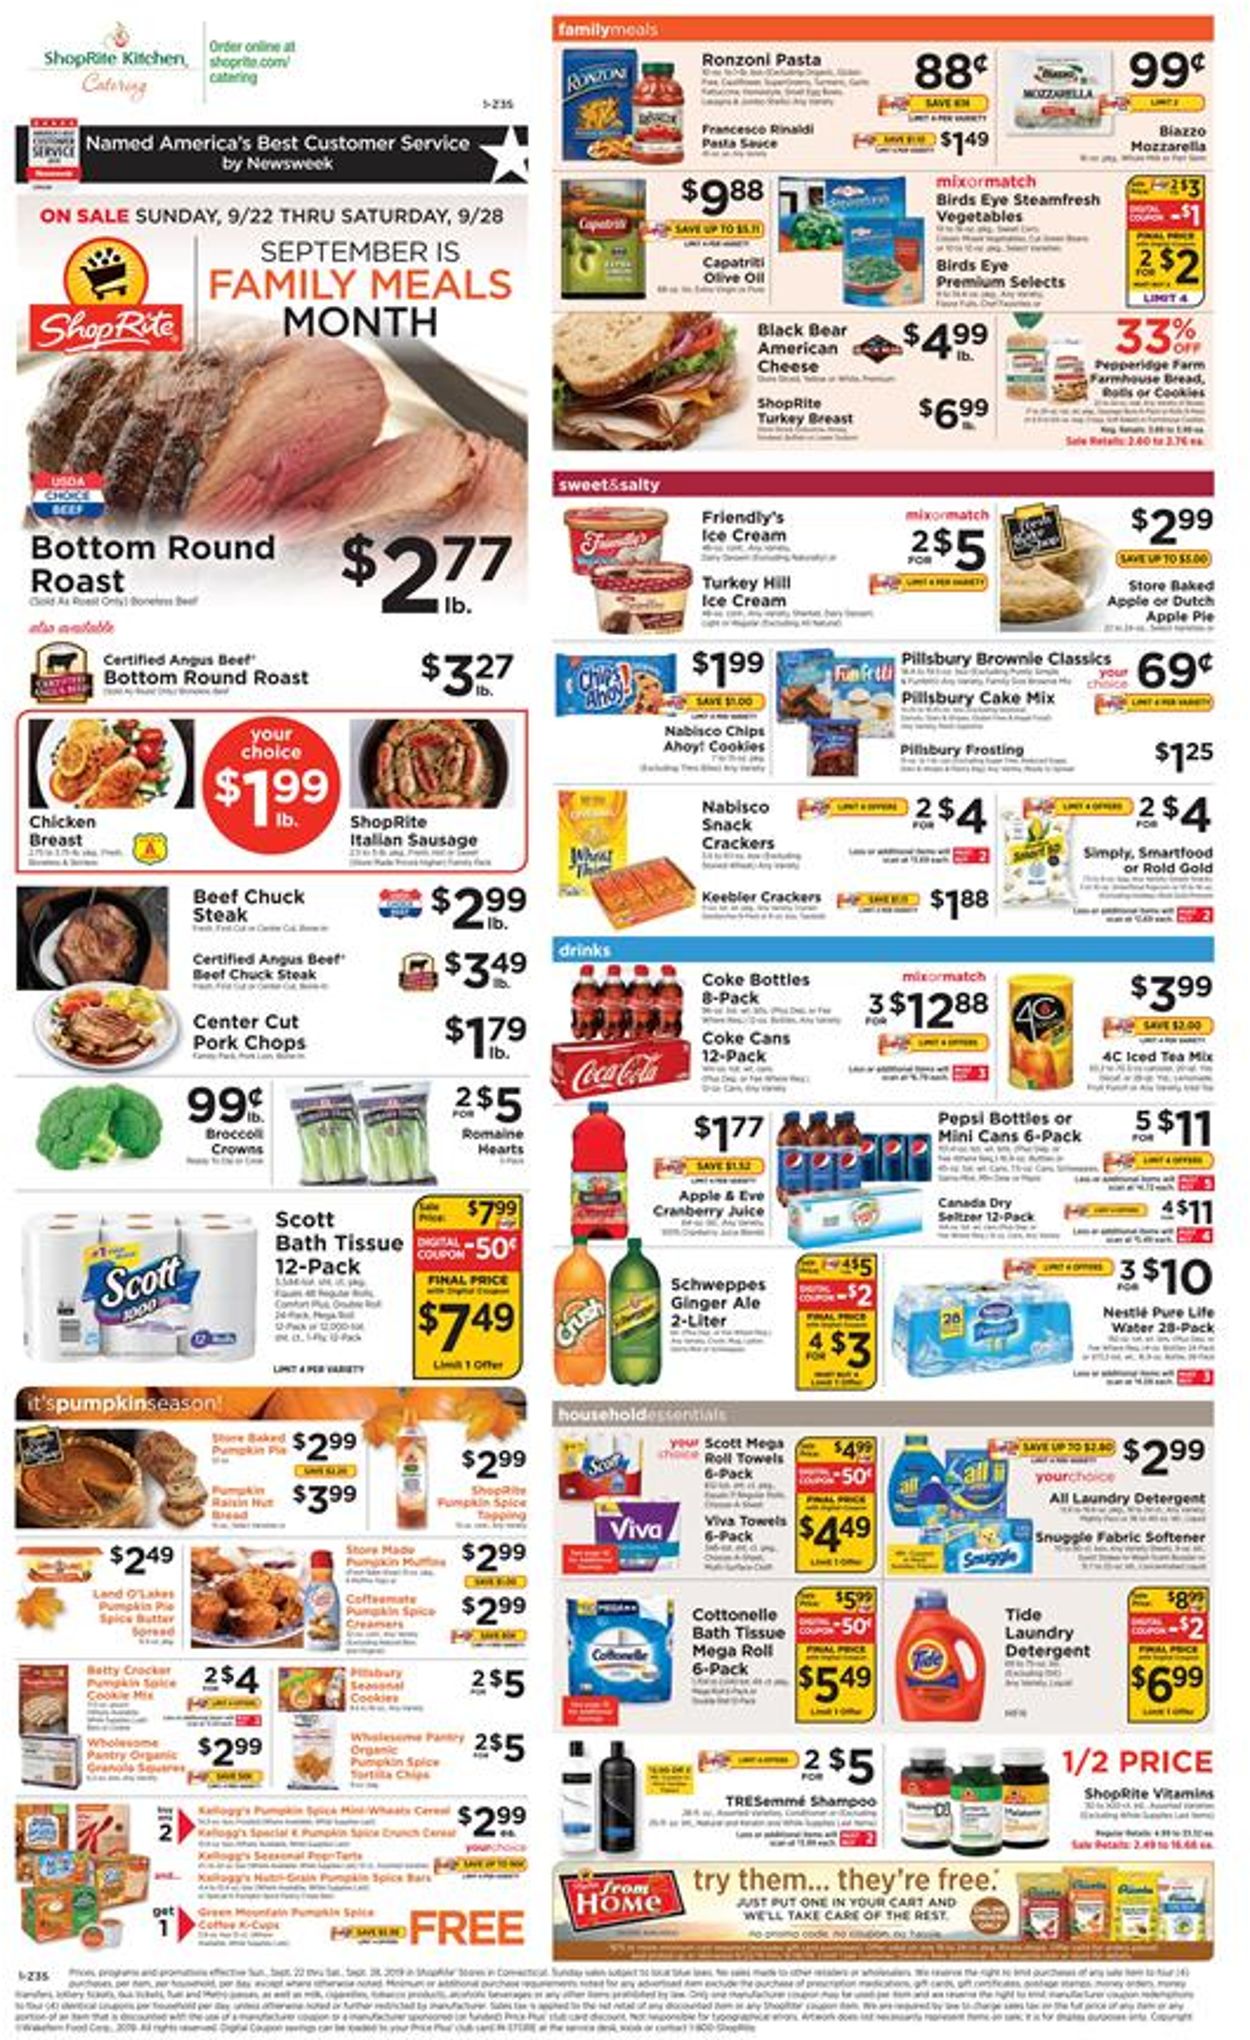 ShopRite Current weekly ad 09/22 - 09/28/2019 - frequent-ads.com